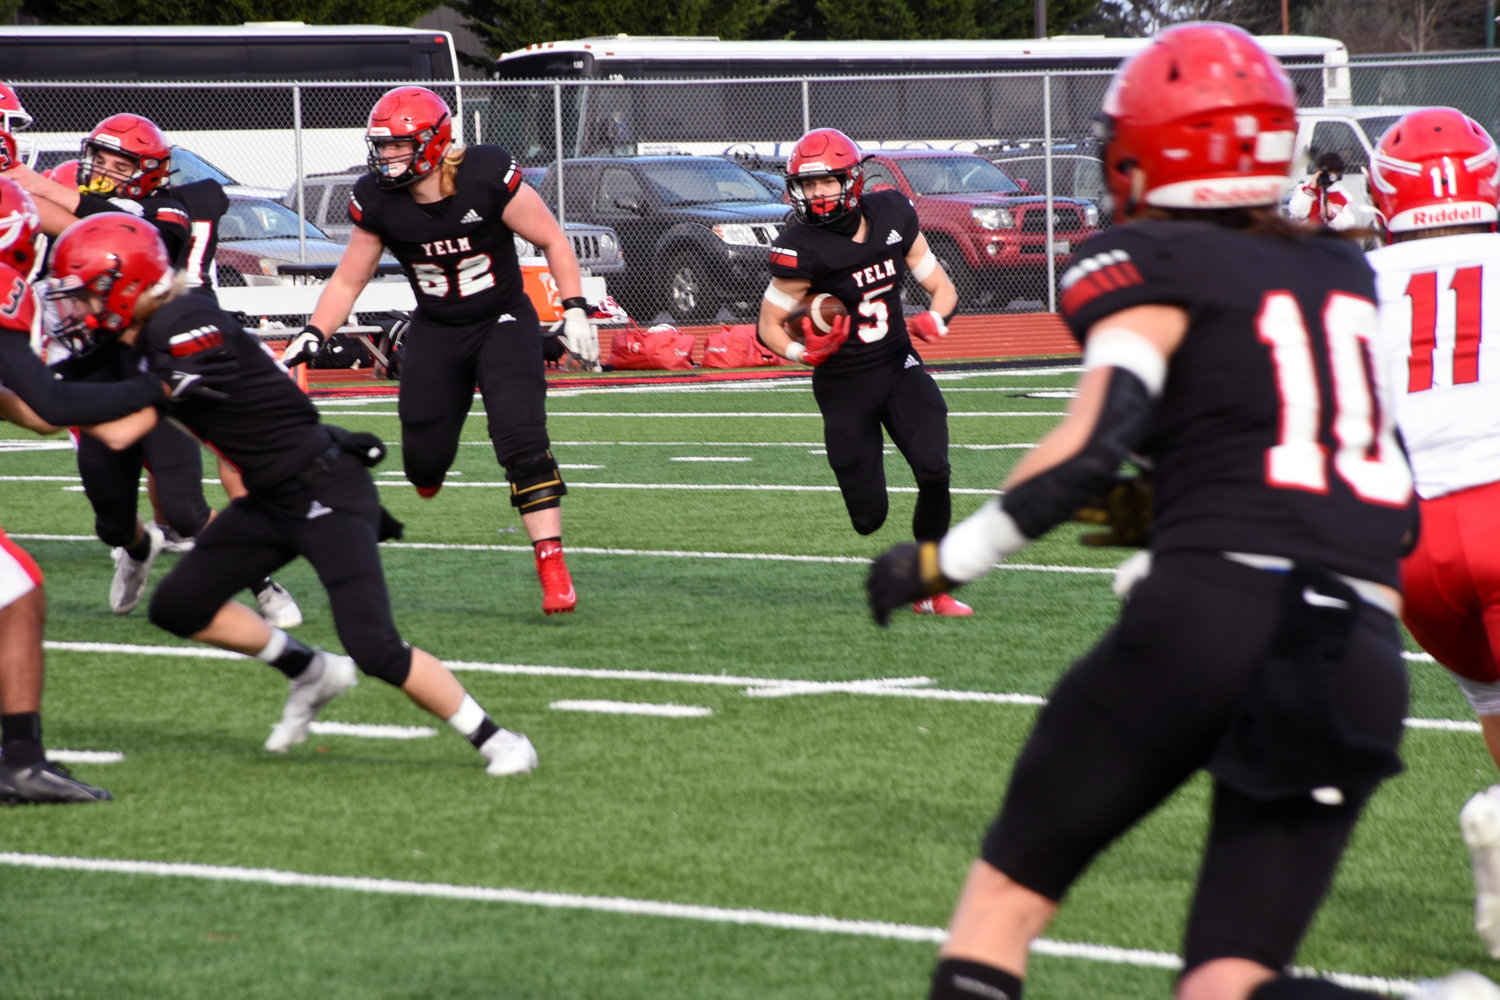 Kyler Ronquillo (#5) runs the ball for Yelm in a quarter finals game against Marysville-Pilchuck